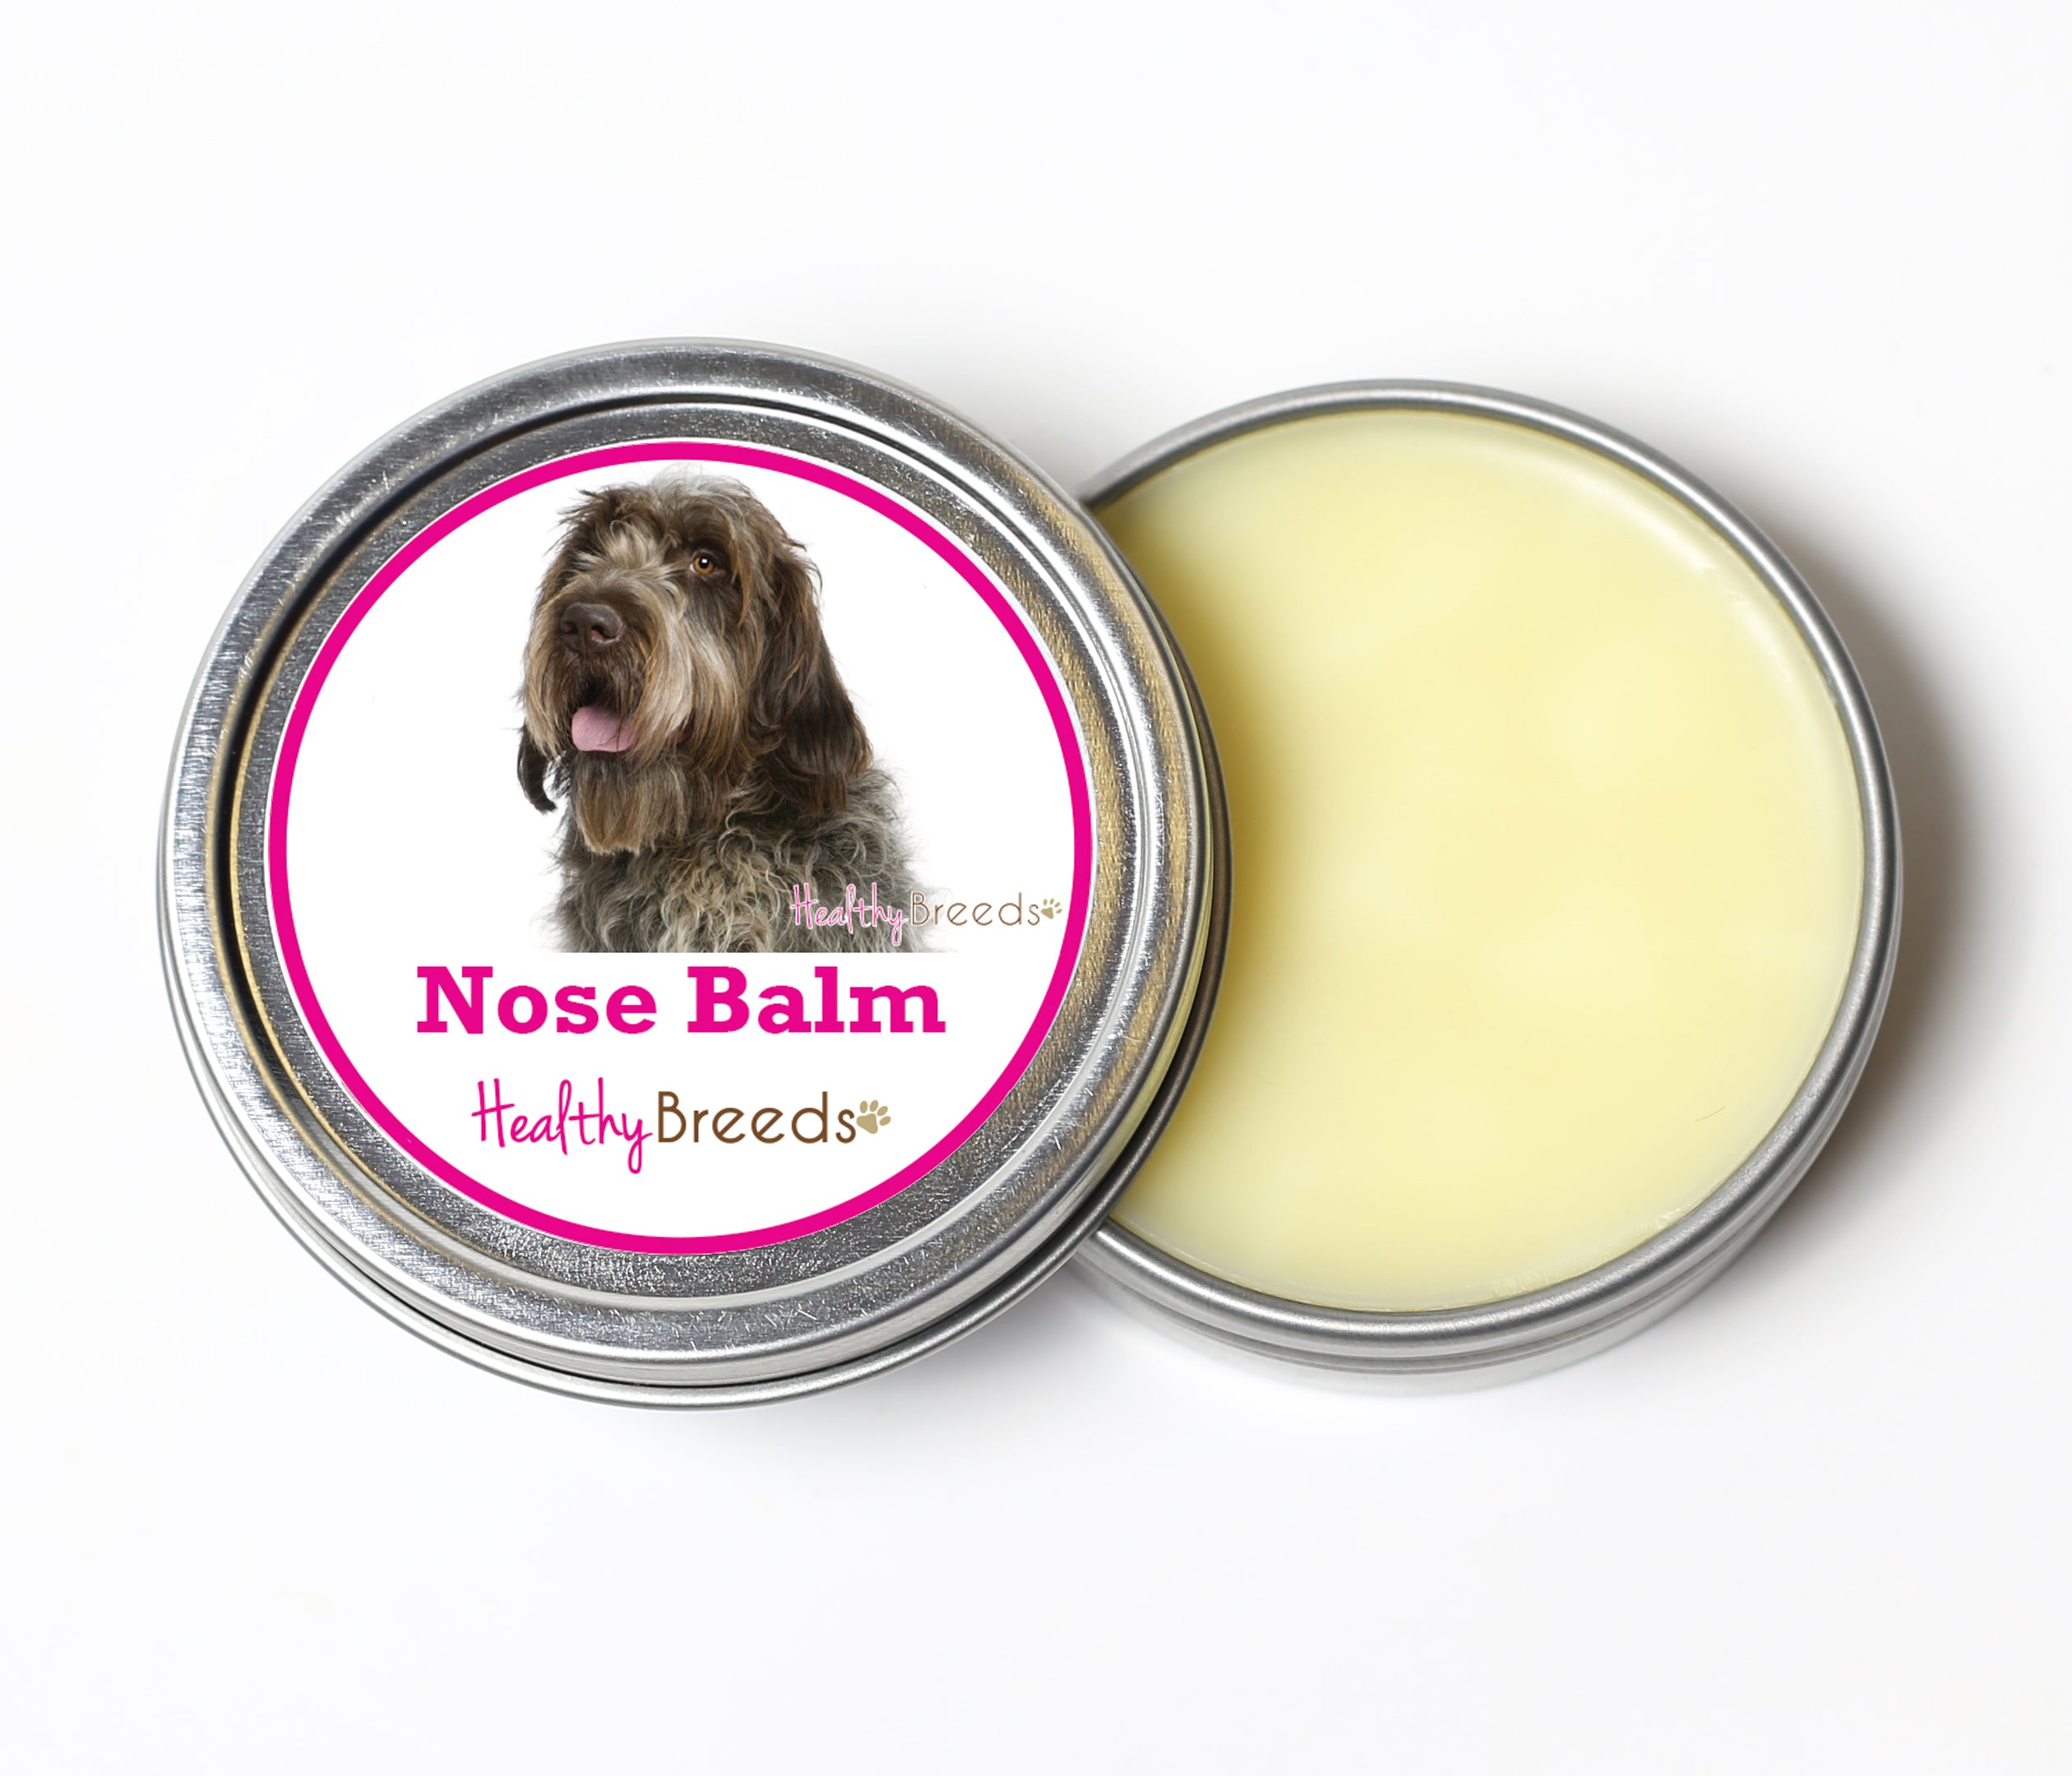 Wirehaired Pointing Griffon Dog Nose Balm 2 oz